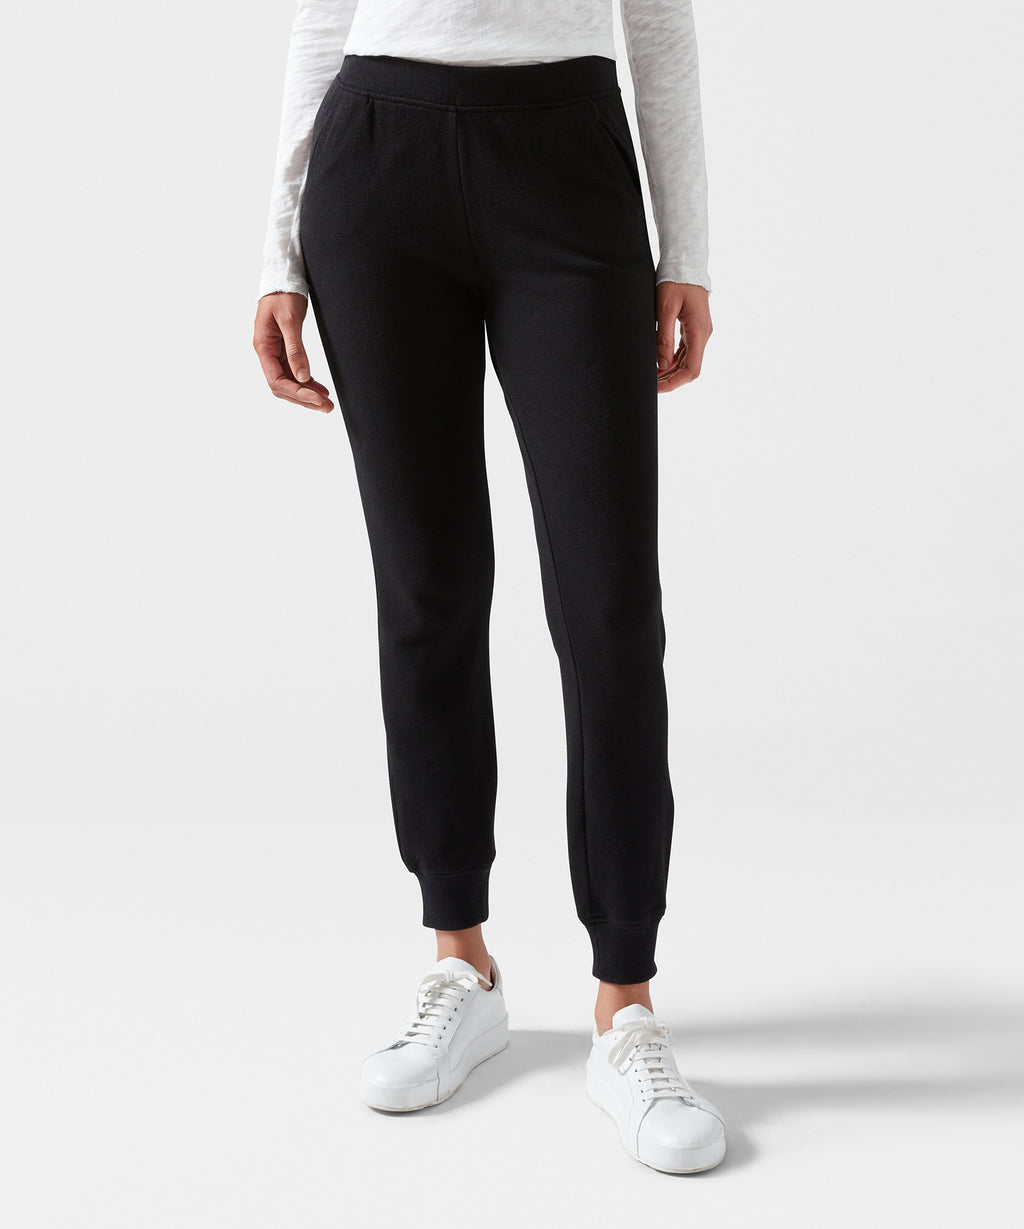 French Terry Joggers Women, French Terry Sweatpant